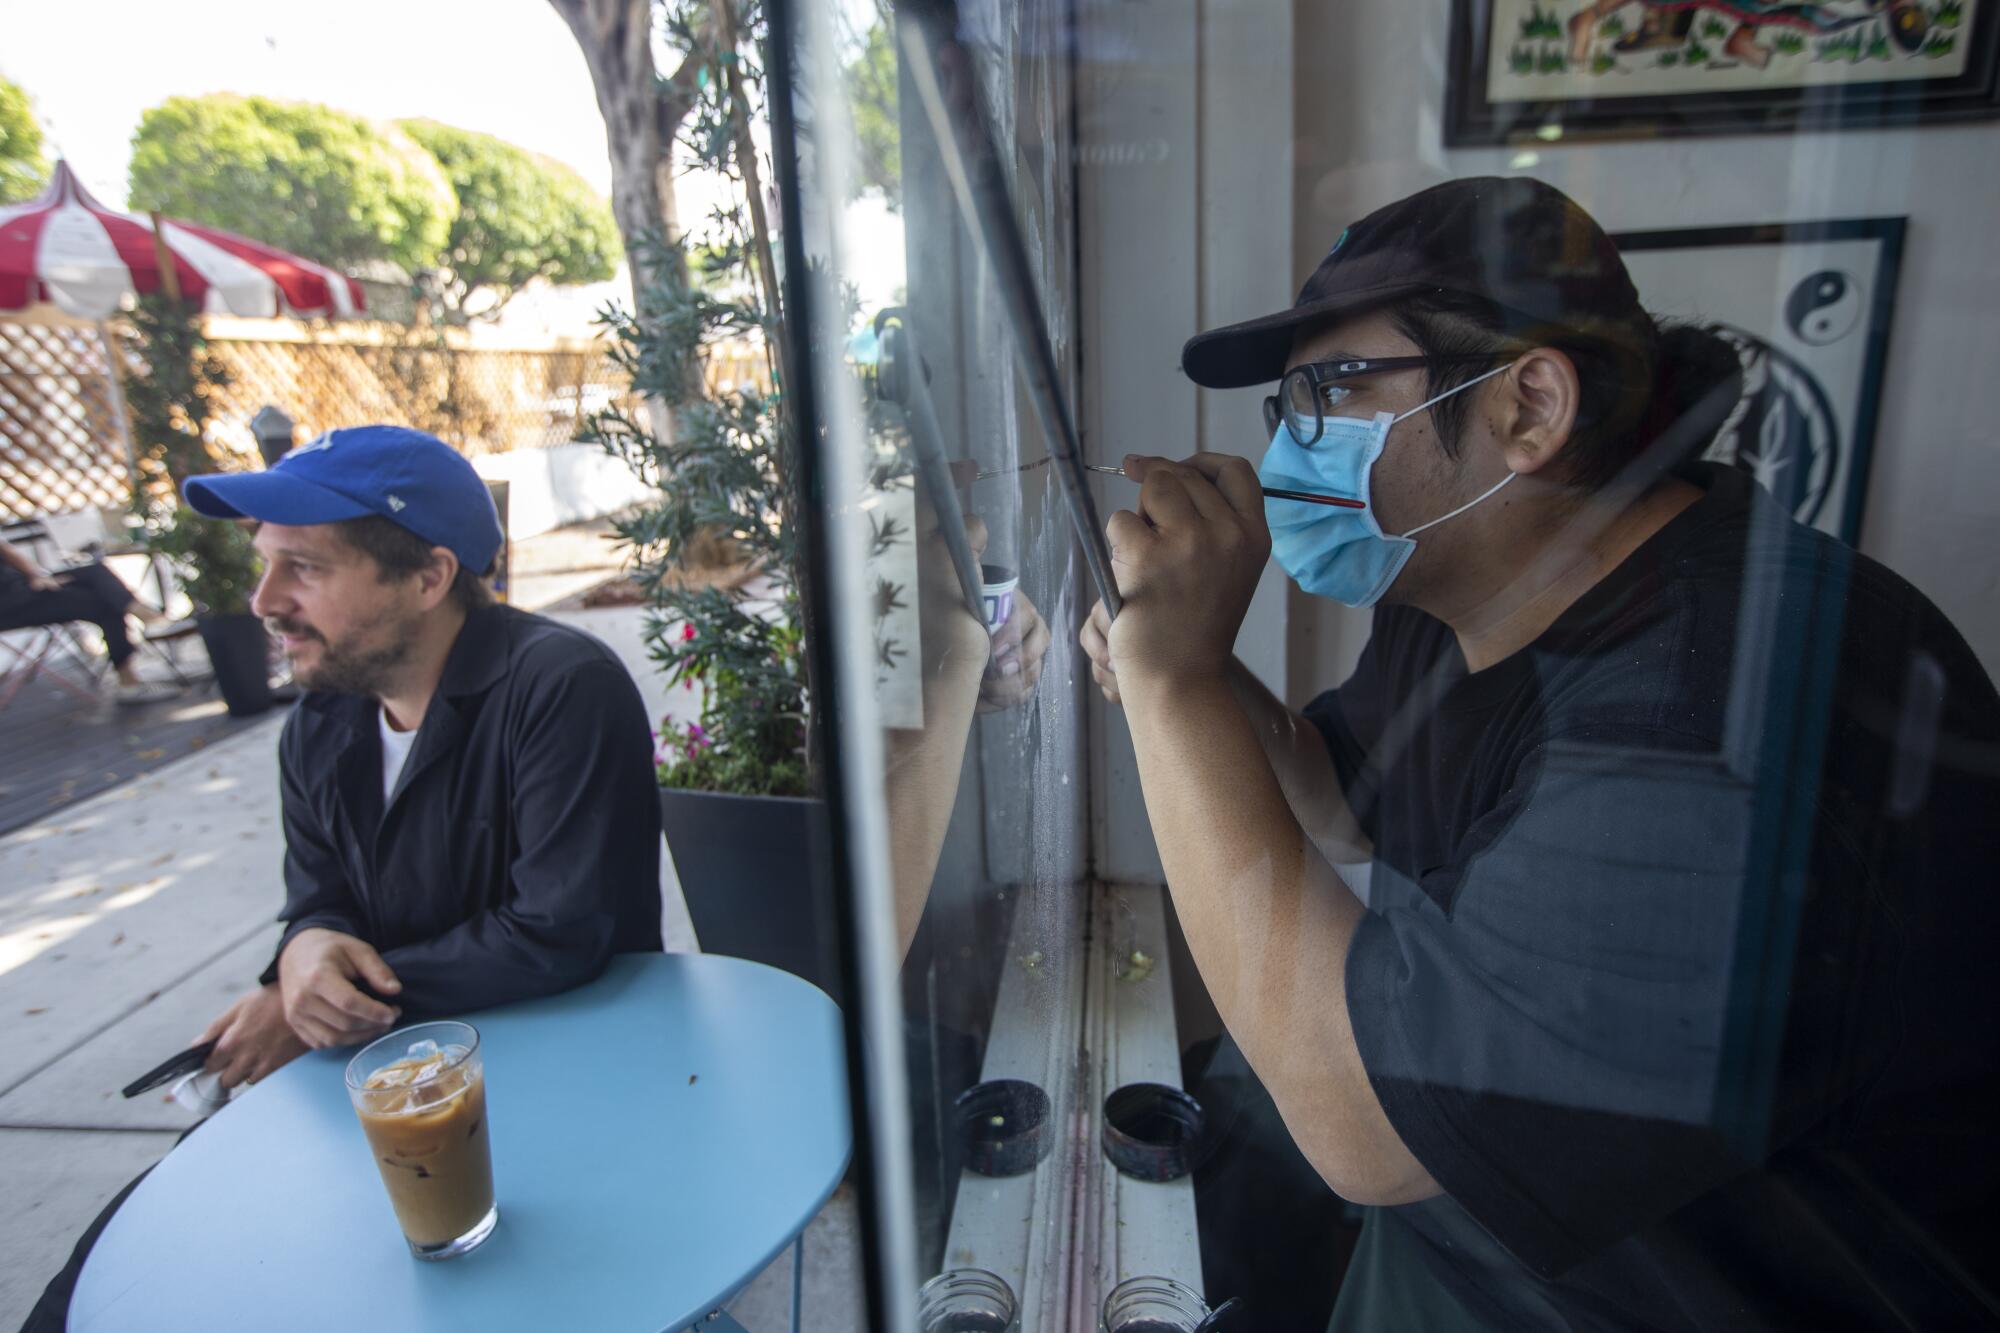 An unmasked man sits at an outdoor table with an iced coffee as another man wearing a mask paints the inside of a shop window